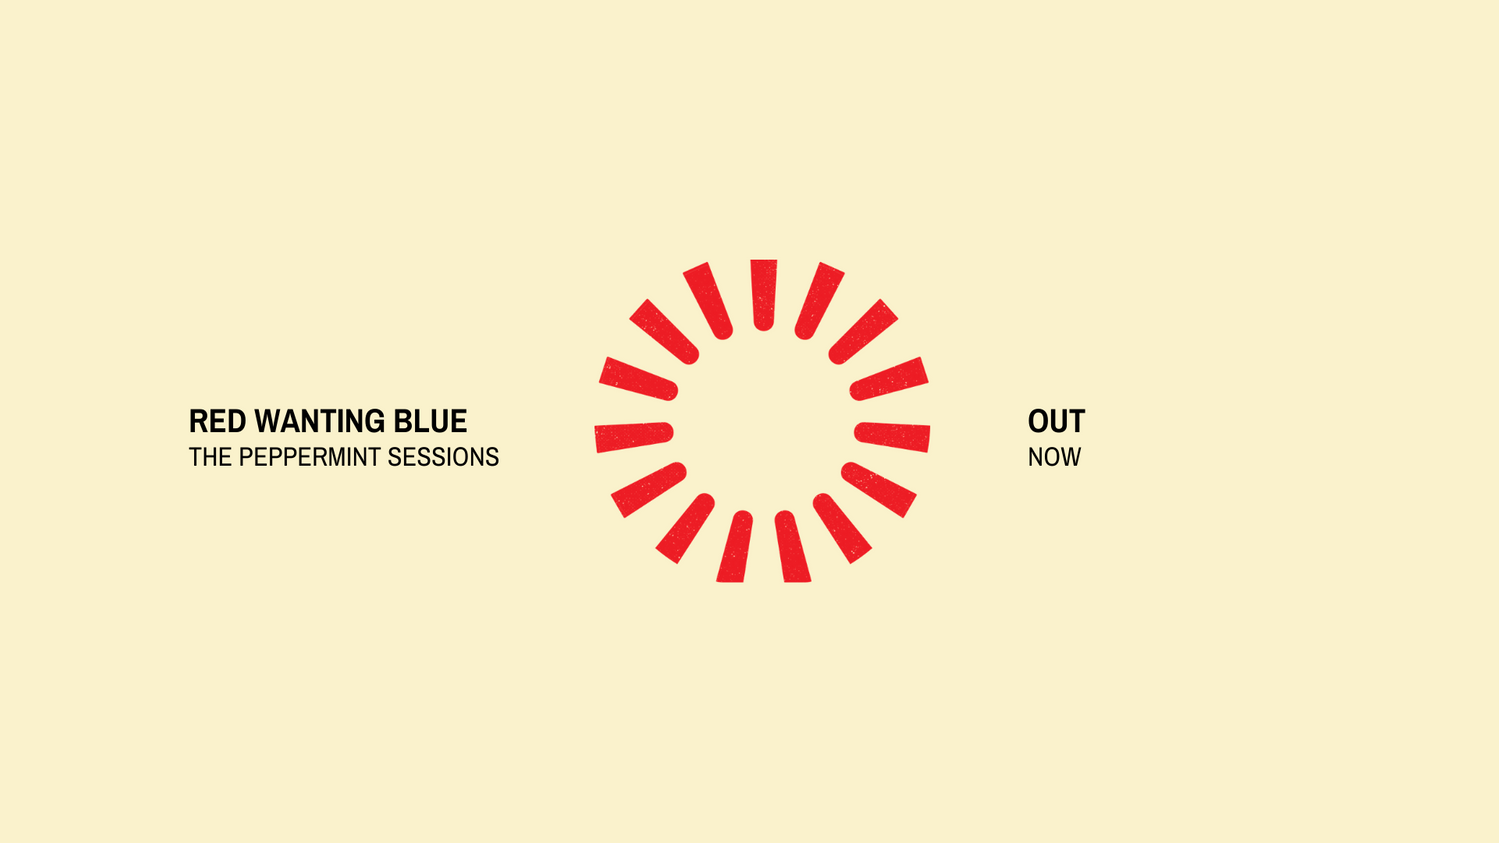 Red Wanting Blue Release Live Studio Album, The Peppermint Sessions